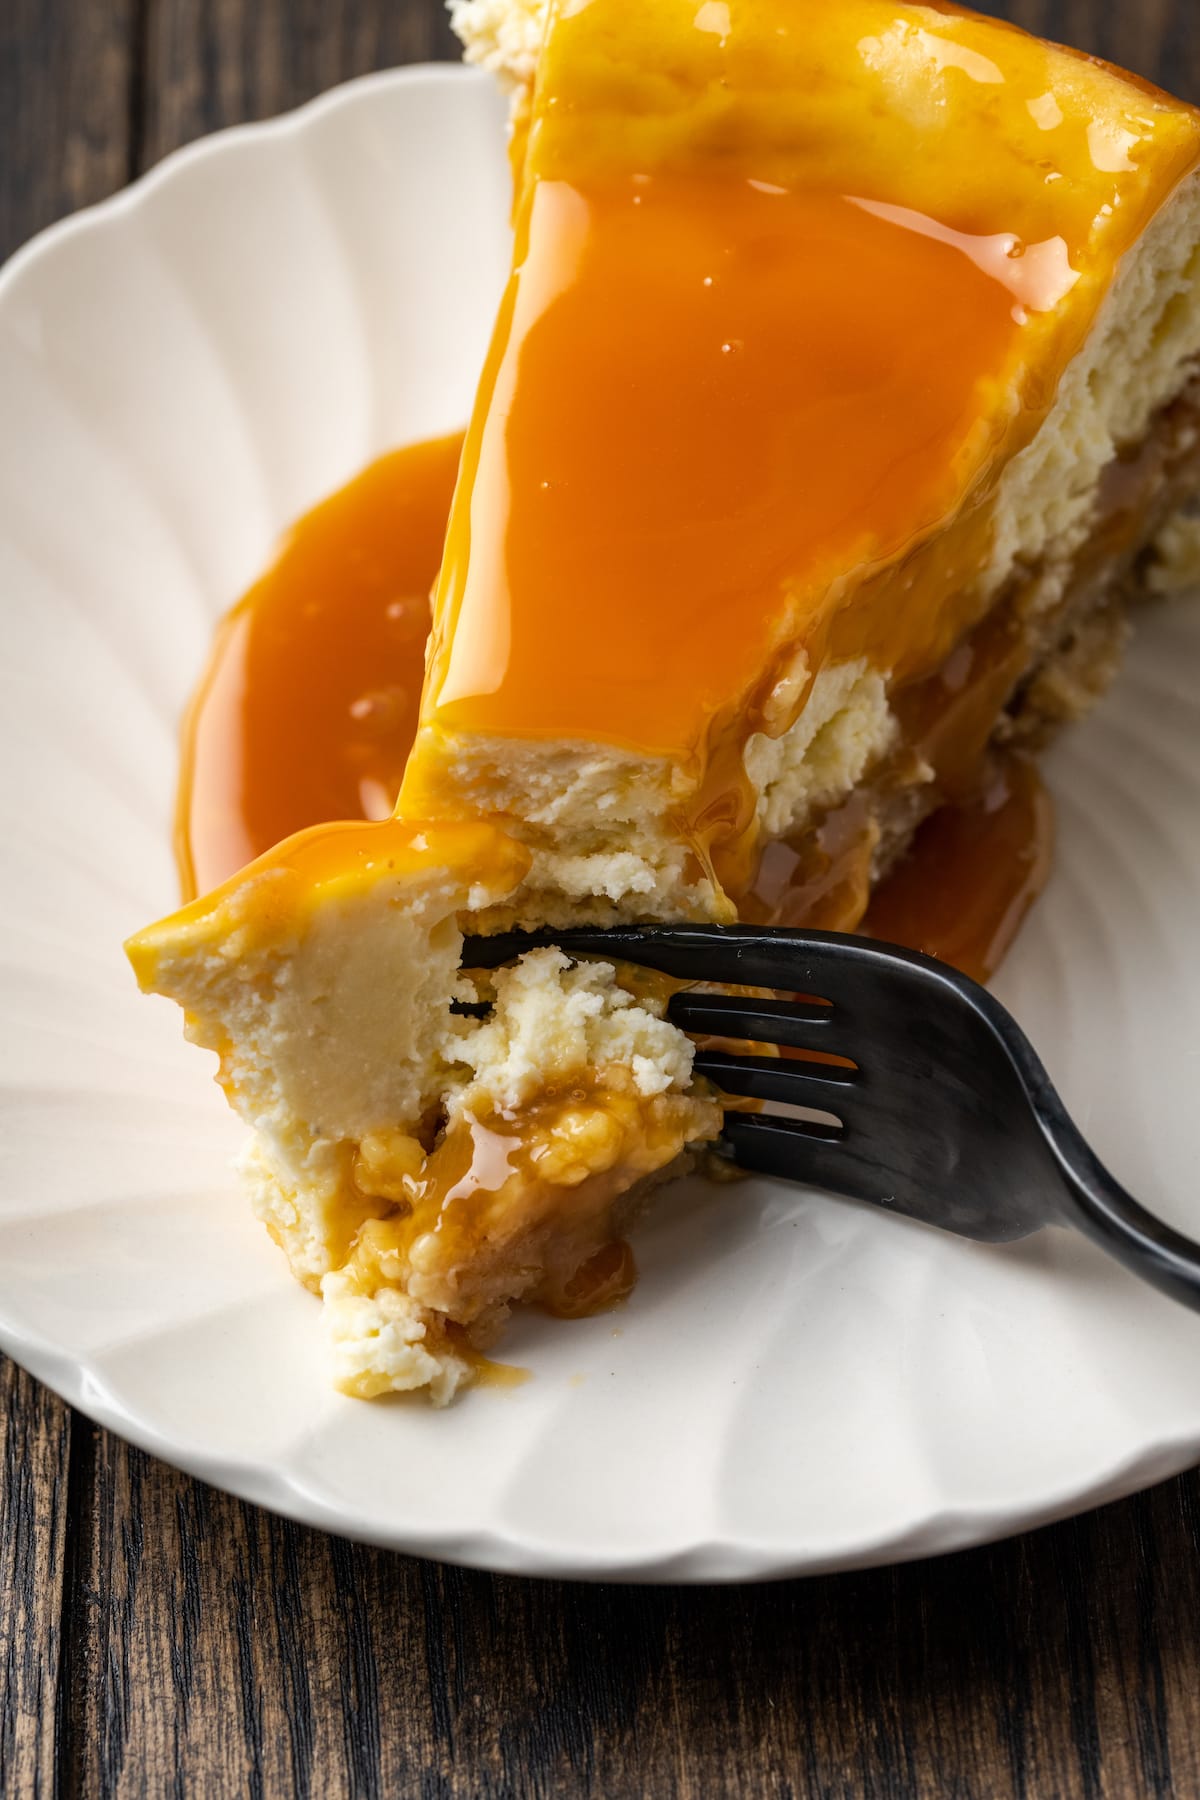 A fork cuts into the tip of a slice of caramel-soaked banana blondie cheesecake on a white plate.